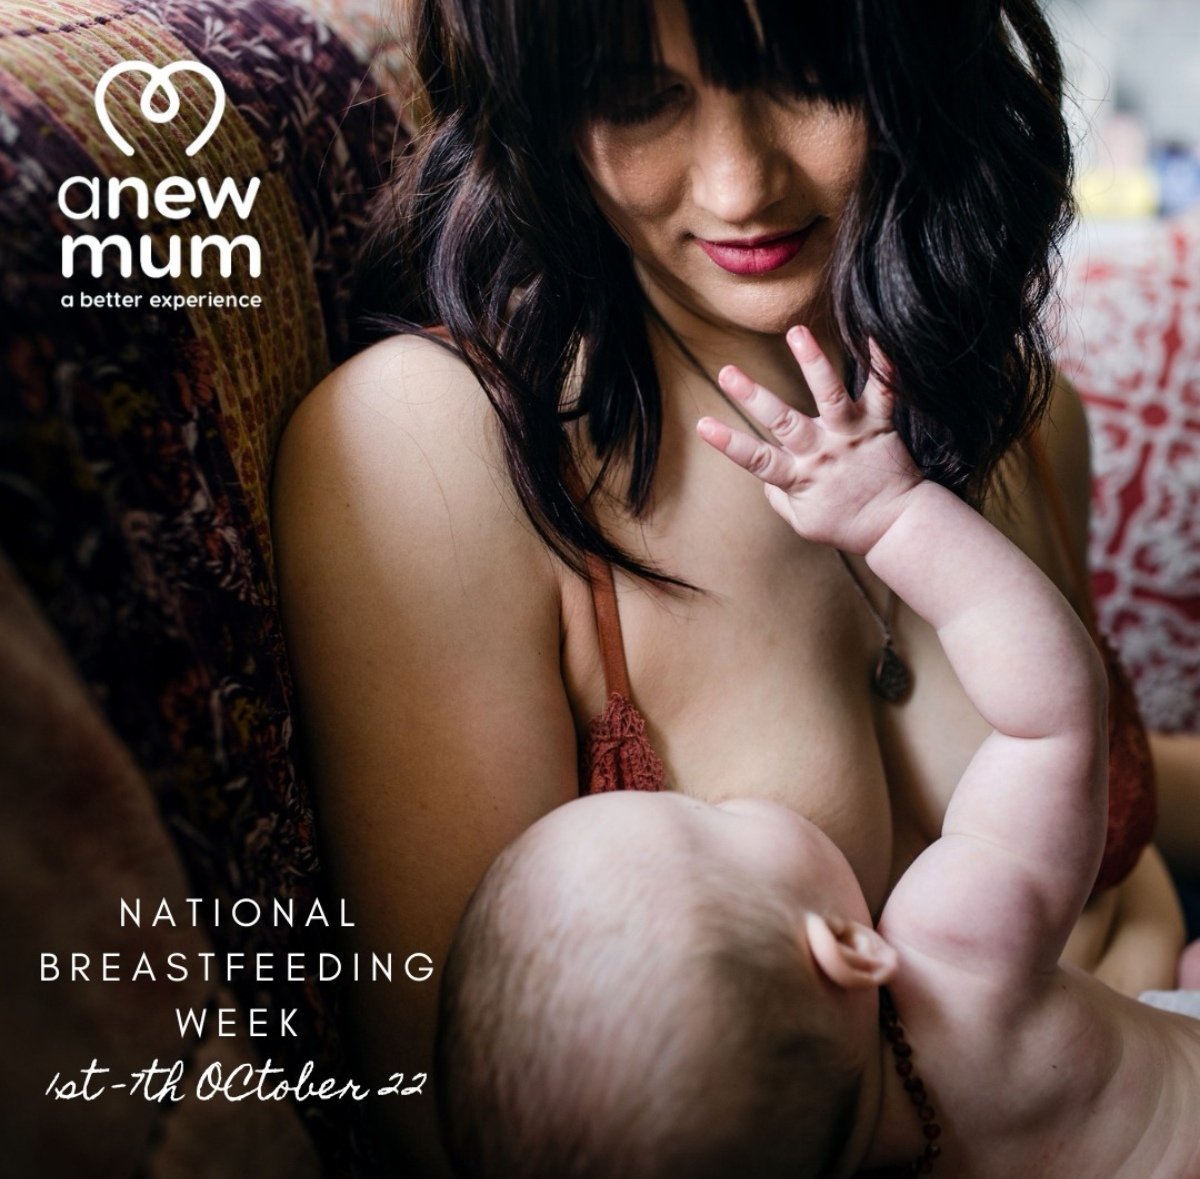 Today 1st Oct 2022 National Breastfeeding Week begins, encouraging parents to take up free expert help l celebrating rising breastfeeding rates in Ireland. According to new HSE figures, there was a 5% point increase in the number of babies breastfed. #nationalbreastfeedingweek